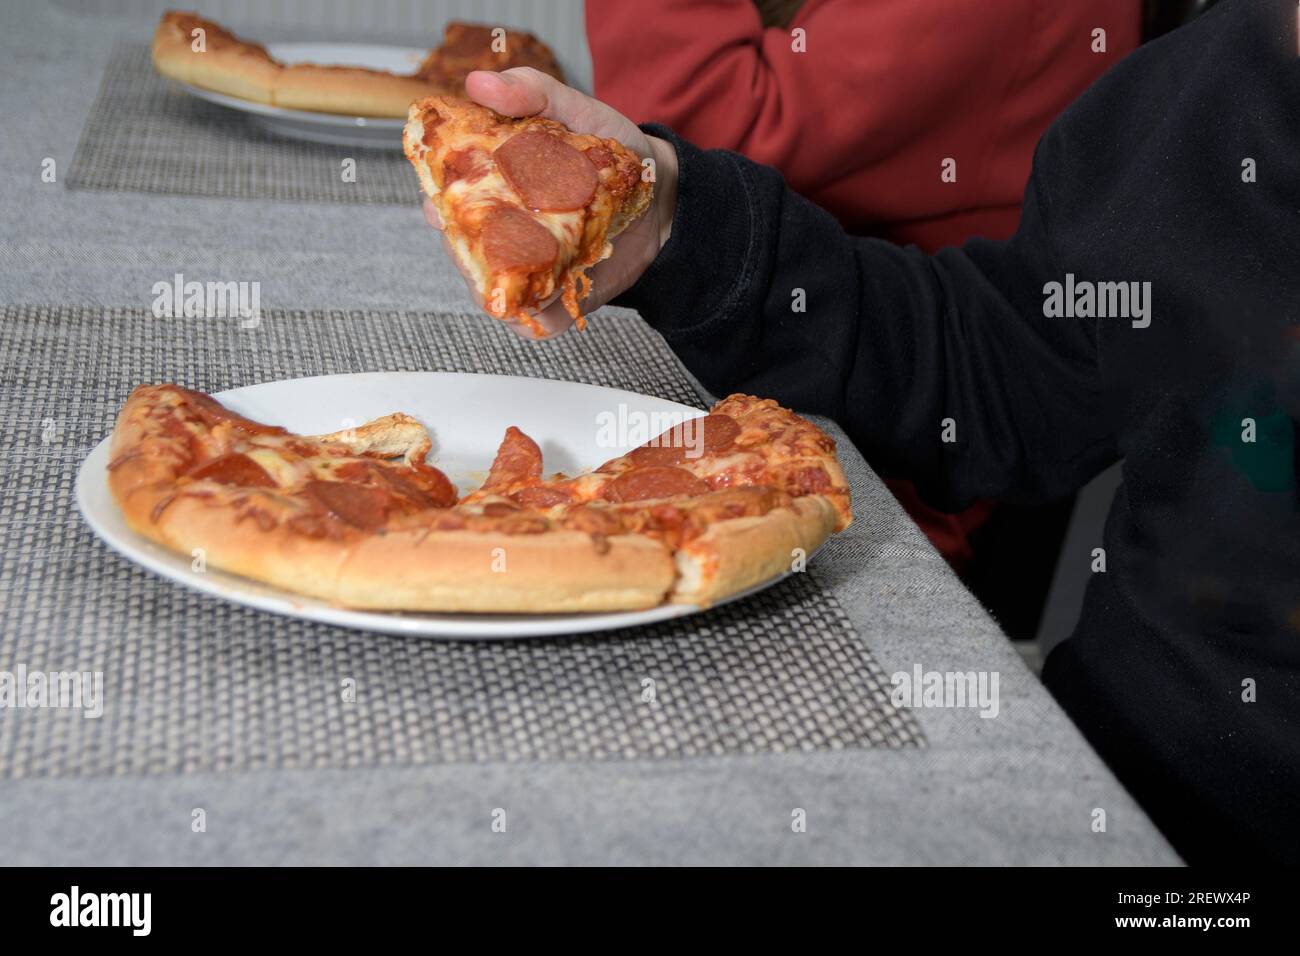 The child takes pizza from a white plate on the table. Close-up hand and piece Stock Photo